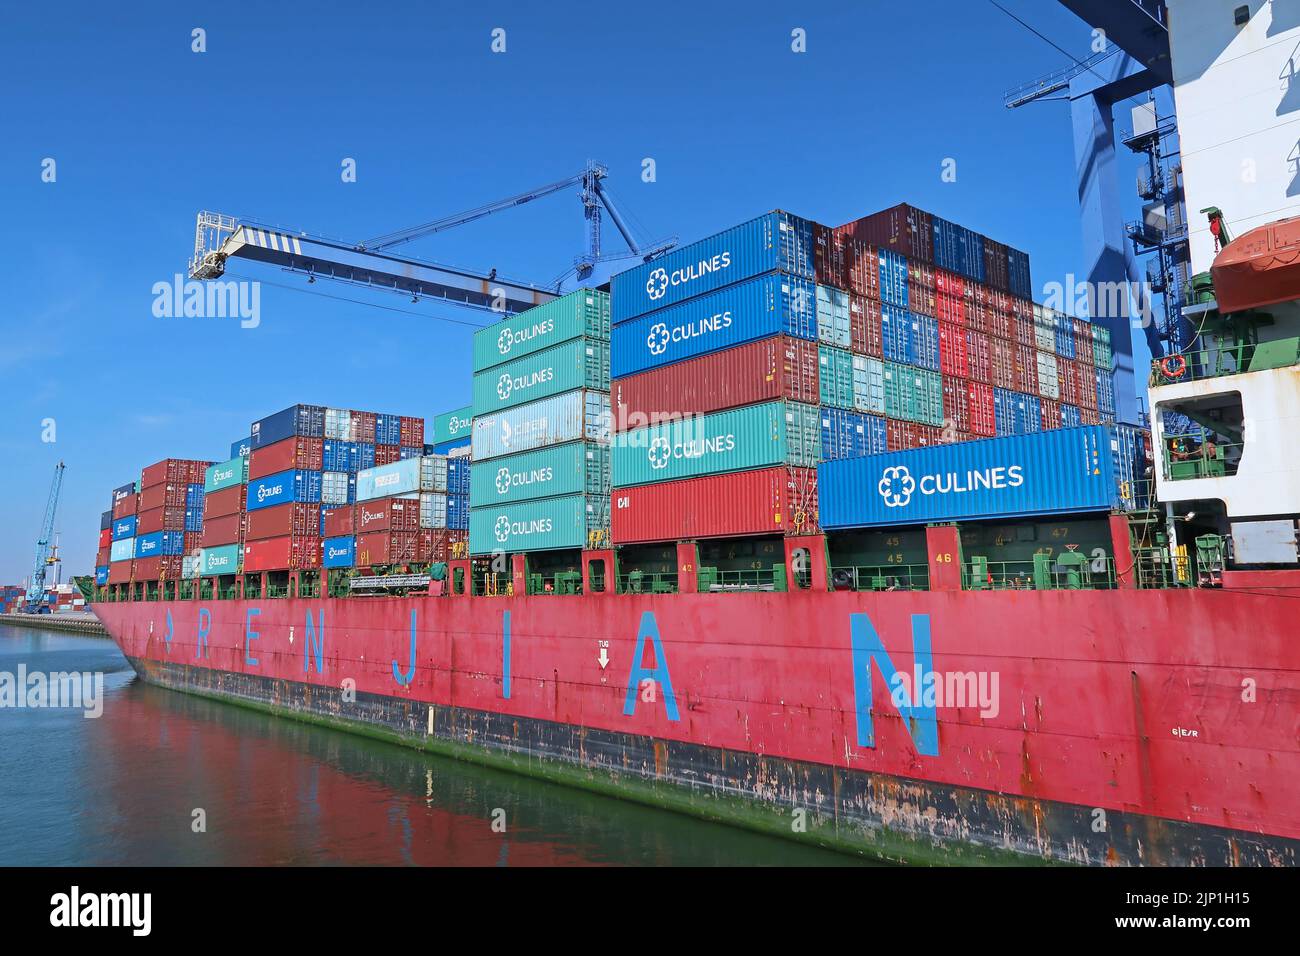 Chinese container ship Ren Jian 25 docked in the port of Rotterdam, Netherlands. Stock Photo